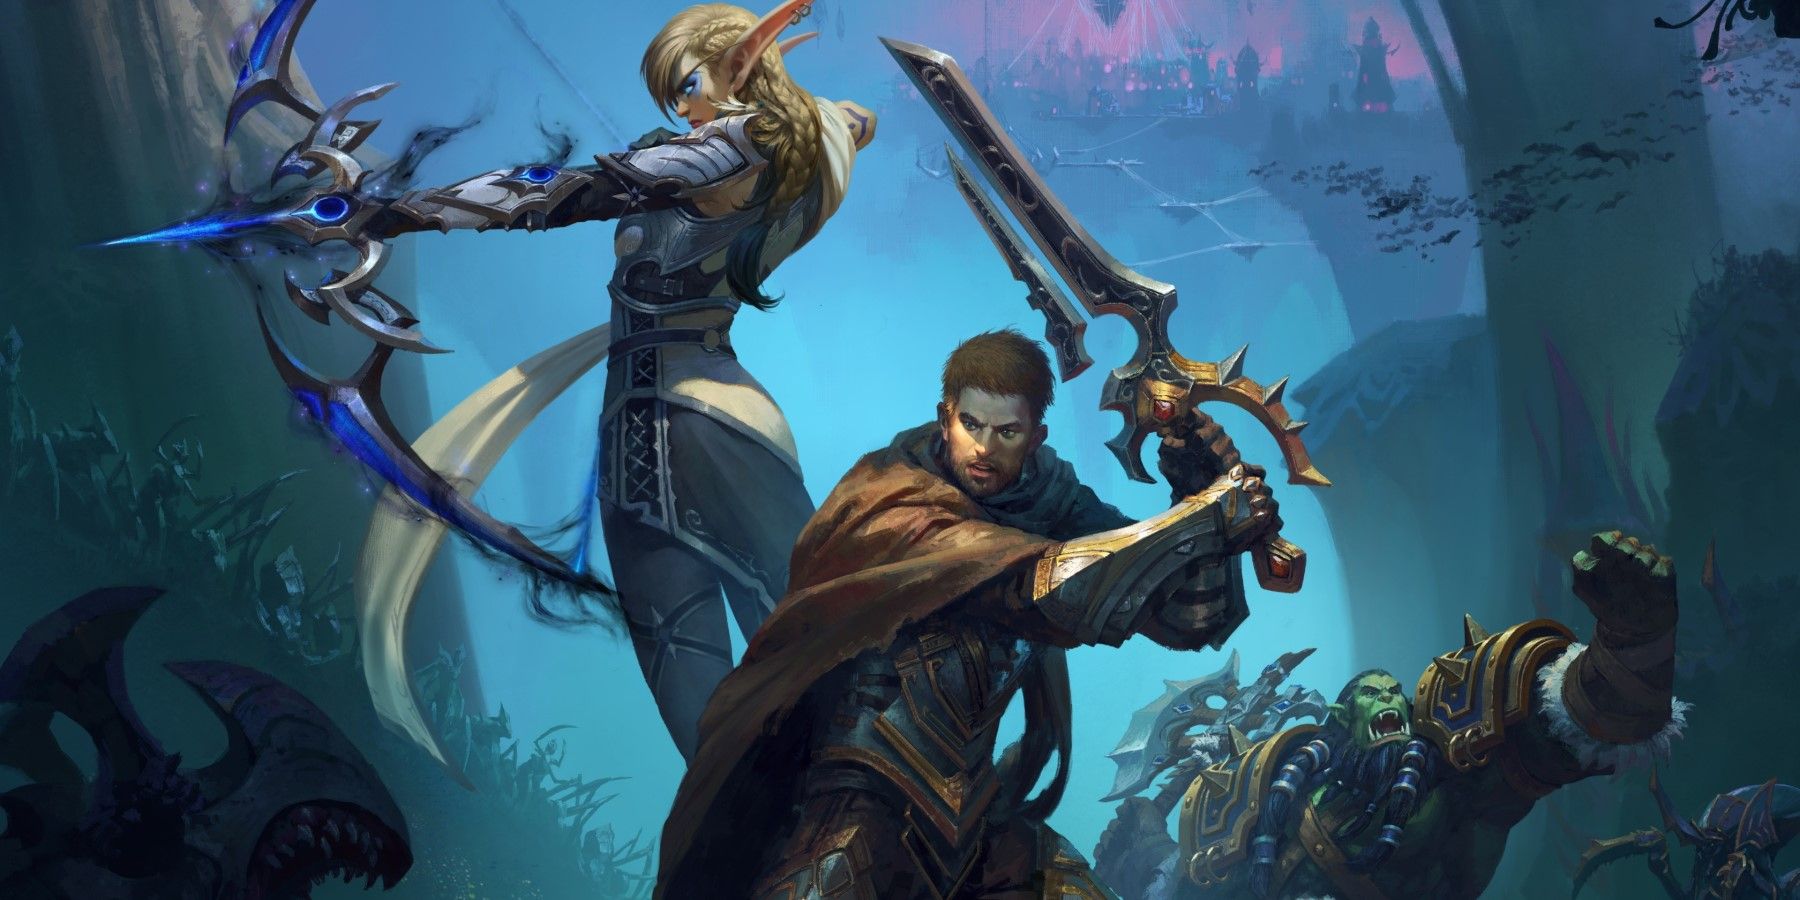 alleria anduin and thrall from the key art for the war within